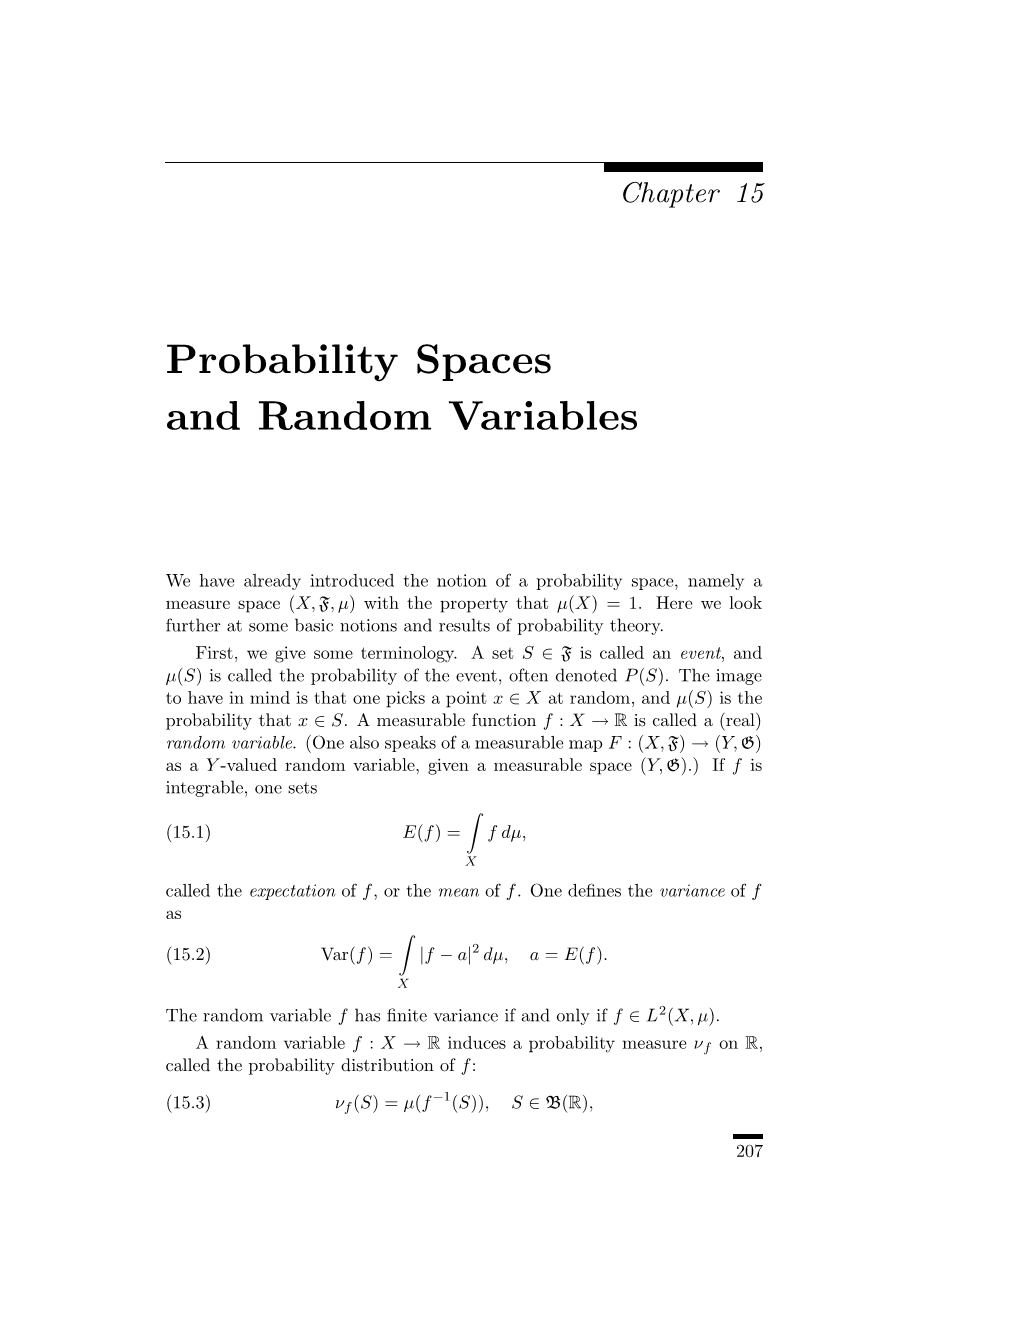 Probability Spaces and Random Variables